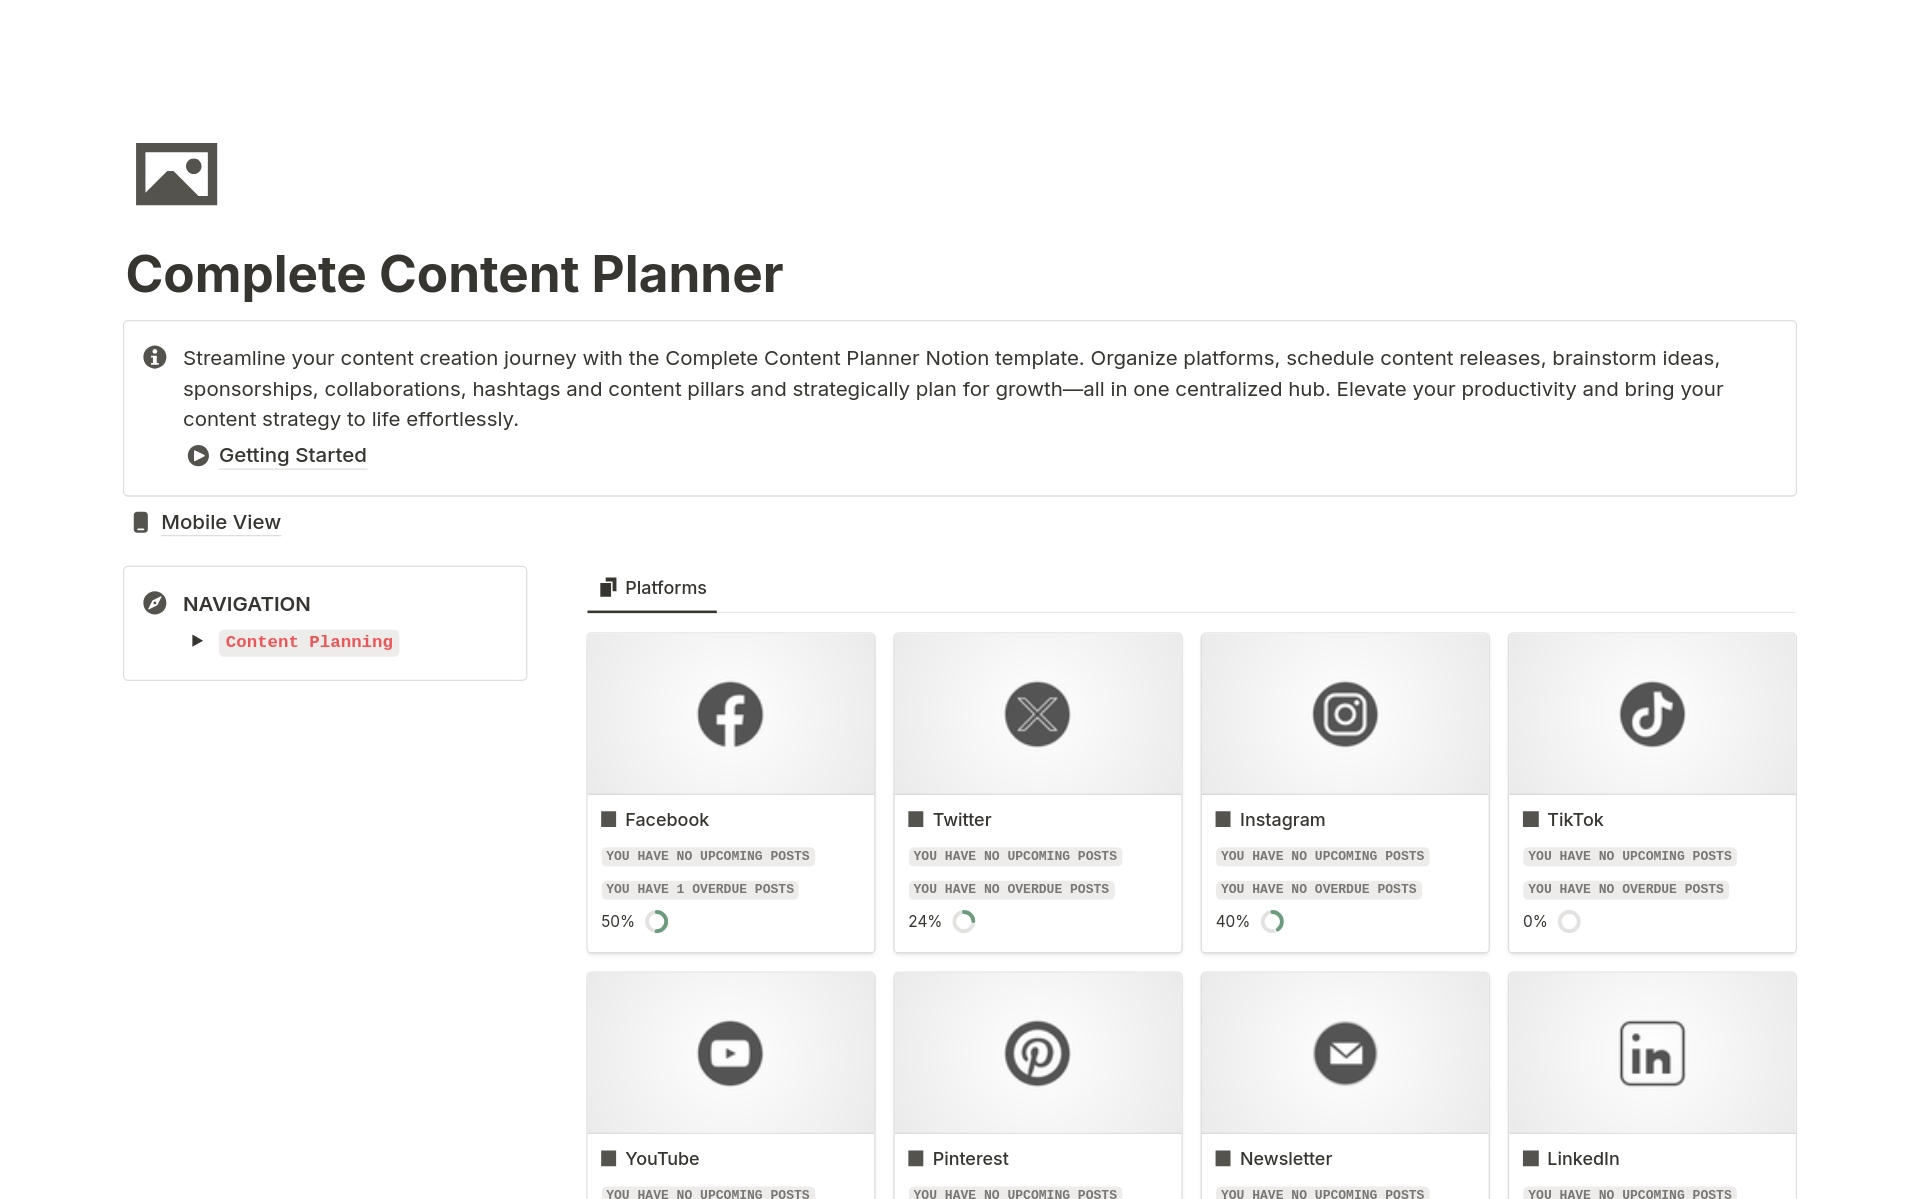 Streamline your content creation journey with the Complete Content Planner Notion template. Organize platforms, schedule content releases, brainstorm ideas, sponsorships, collaborations, hashtags and content pillars and strategically plan for growth—all in one centralized hub. 